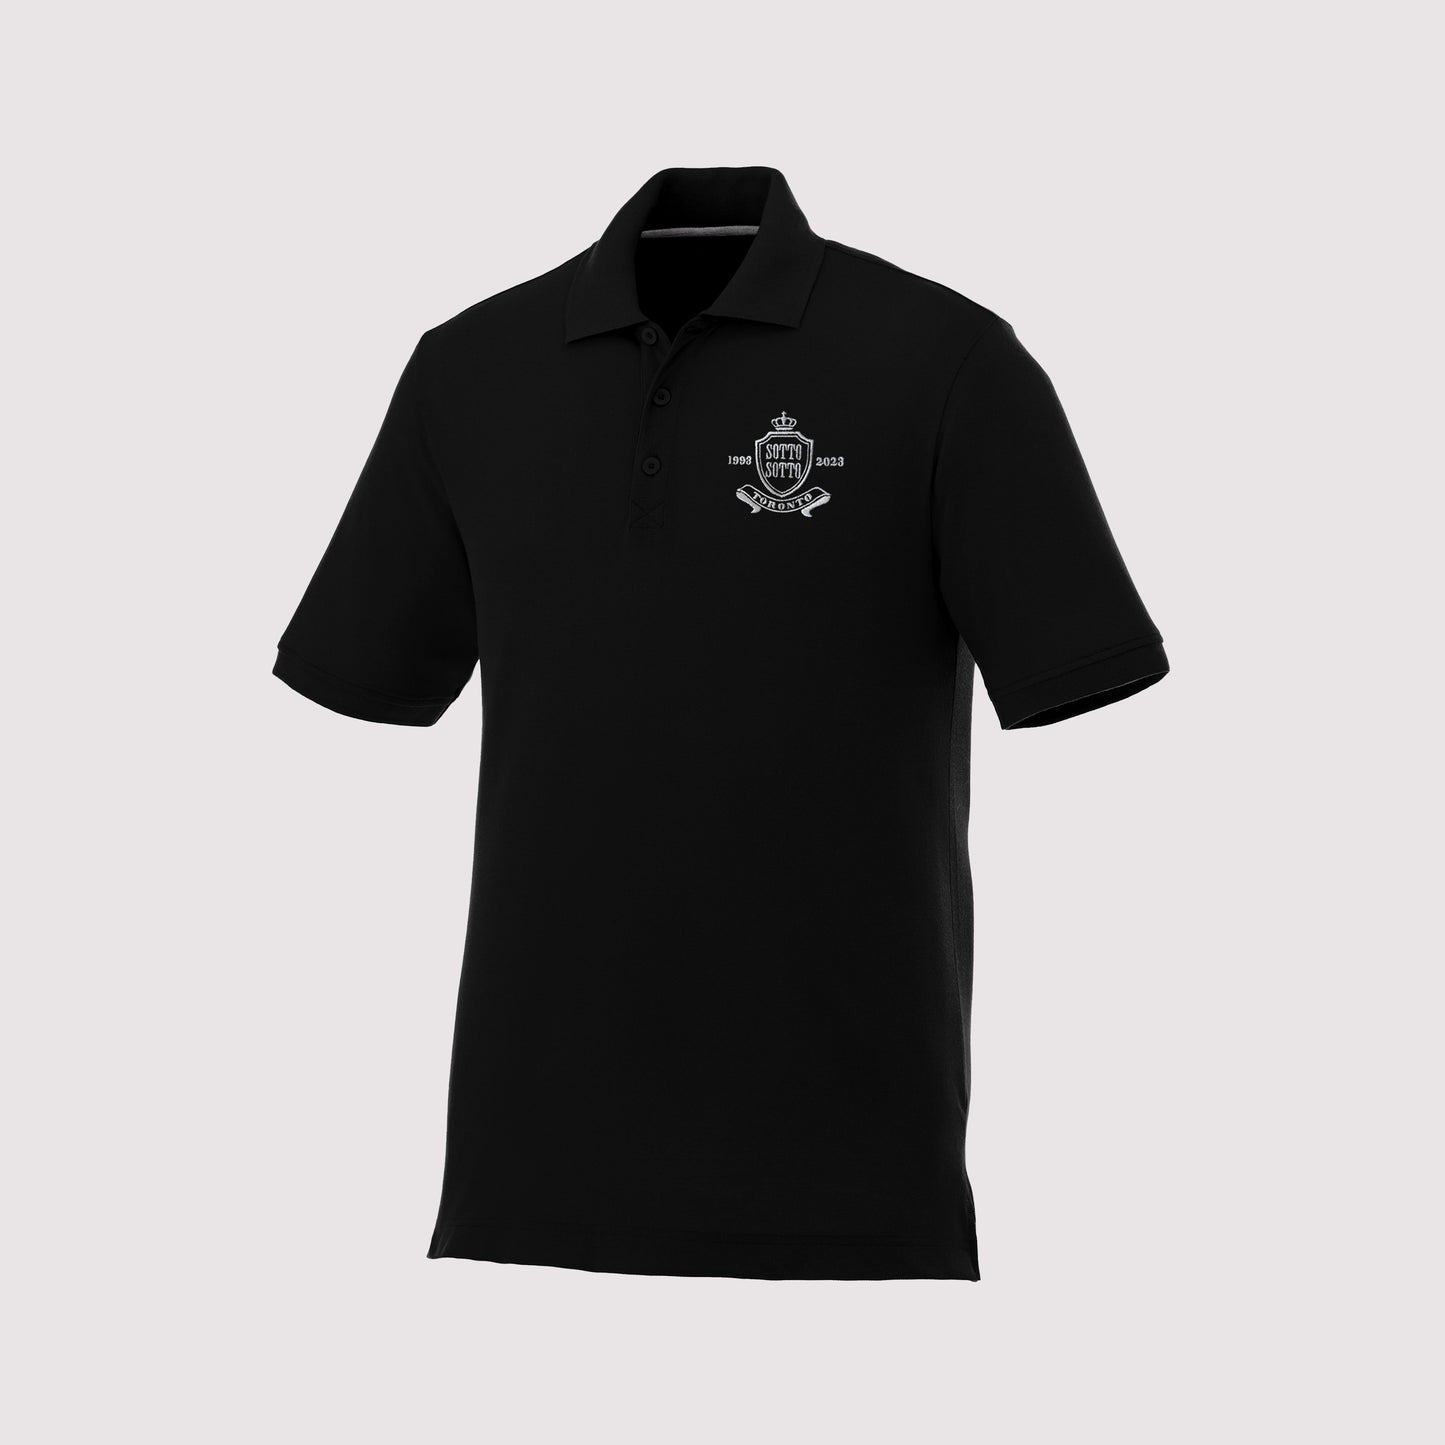 30 Year Anniversary Crest Polo - Limited Edition